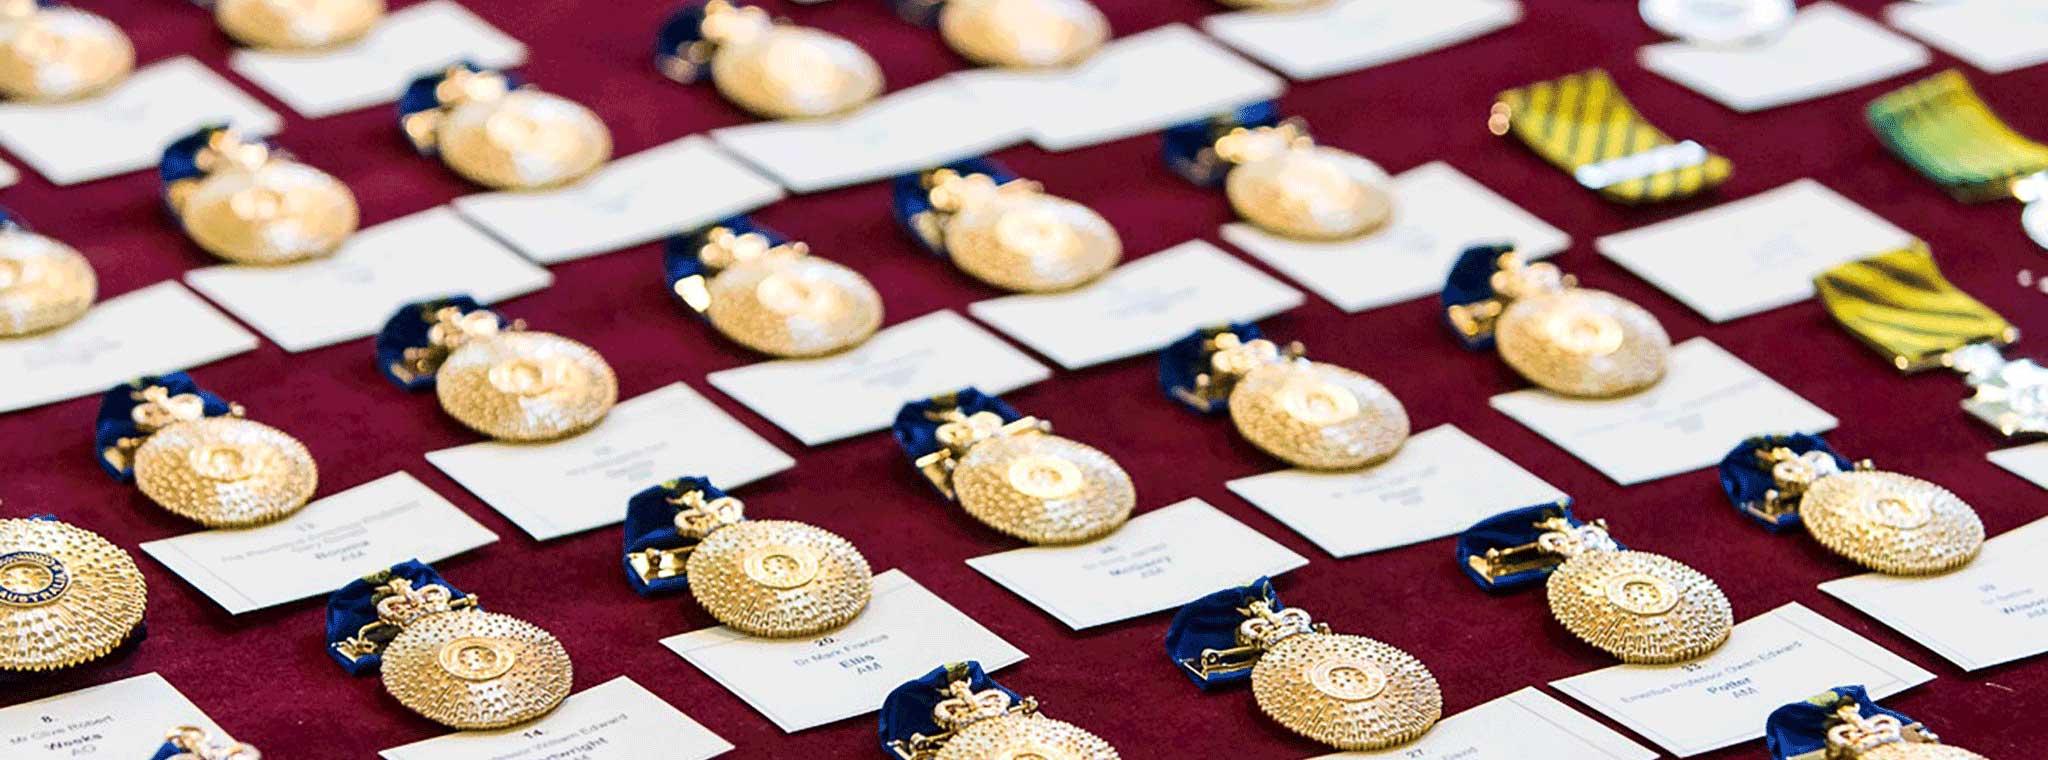 Australian honours and awards in rows ready for awarding